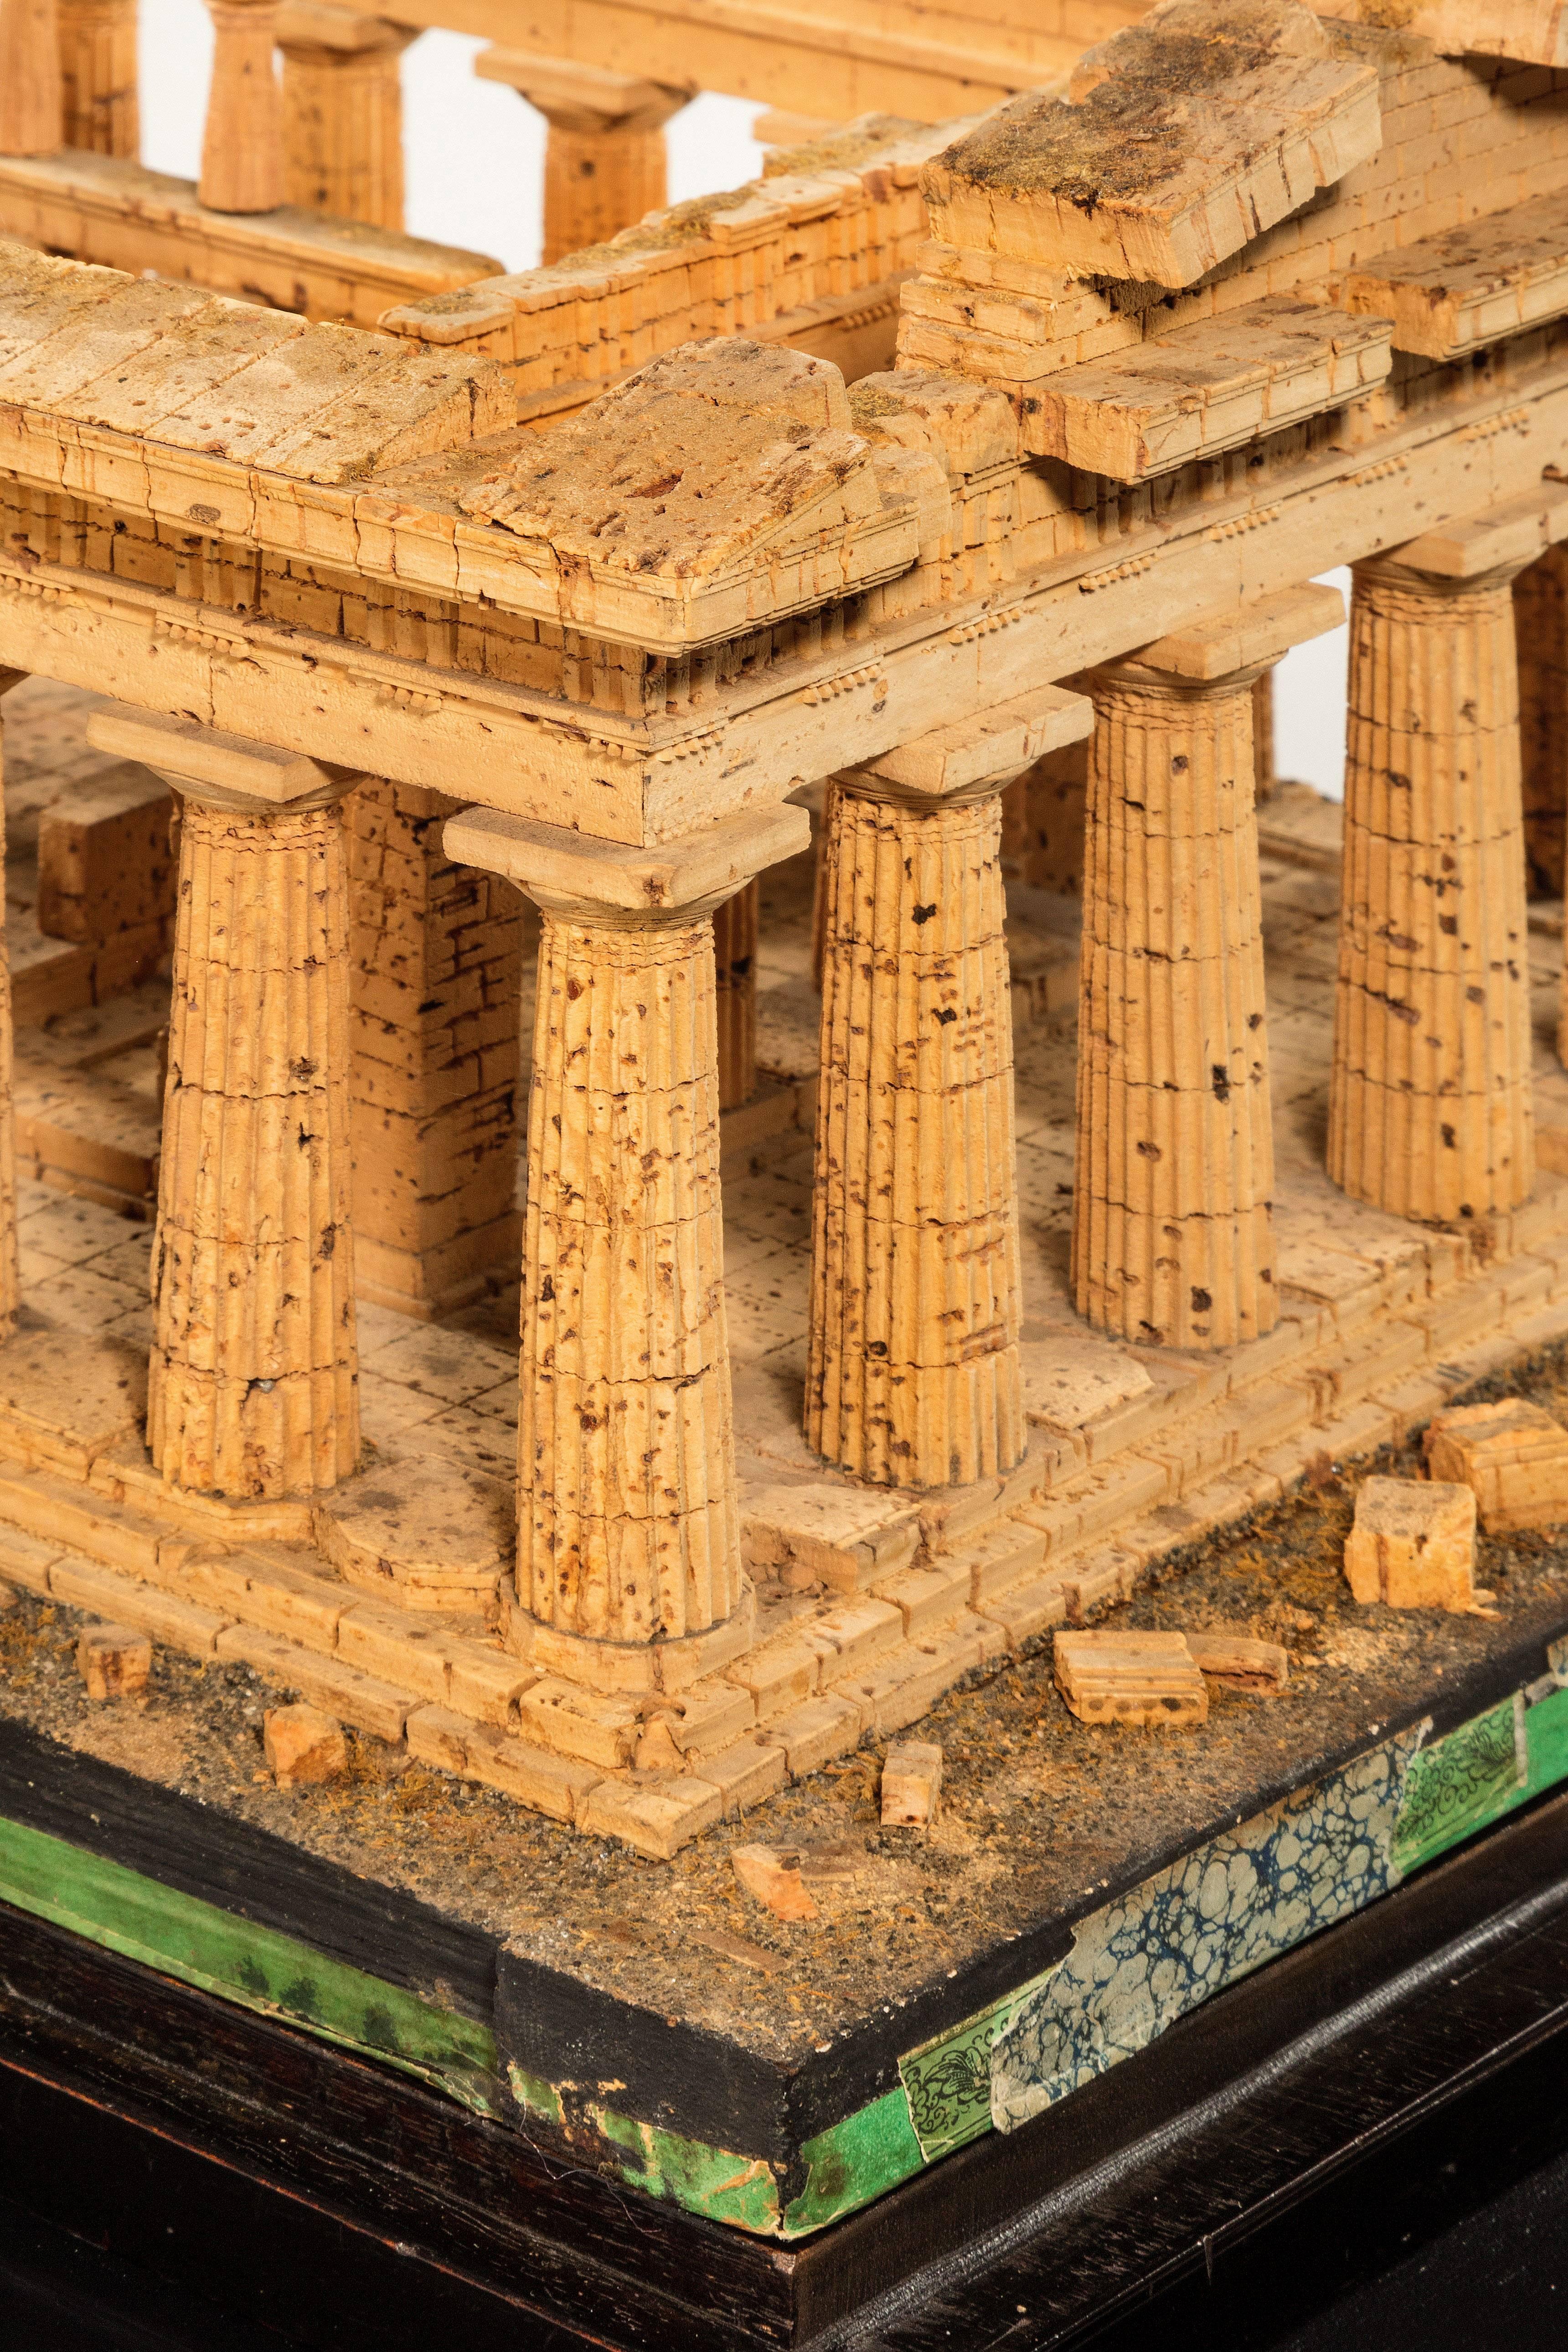 Early 19th Century Cork Model of the Temple of Zeus at Paestum